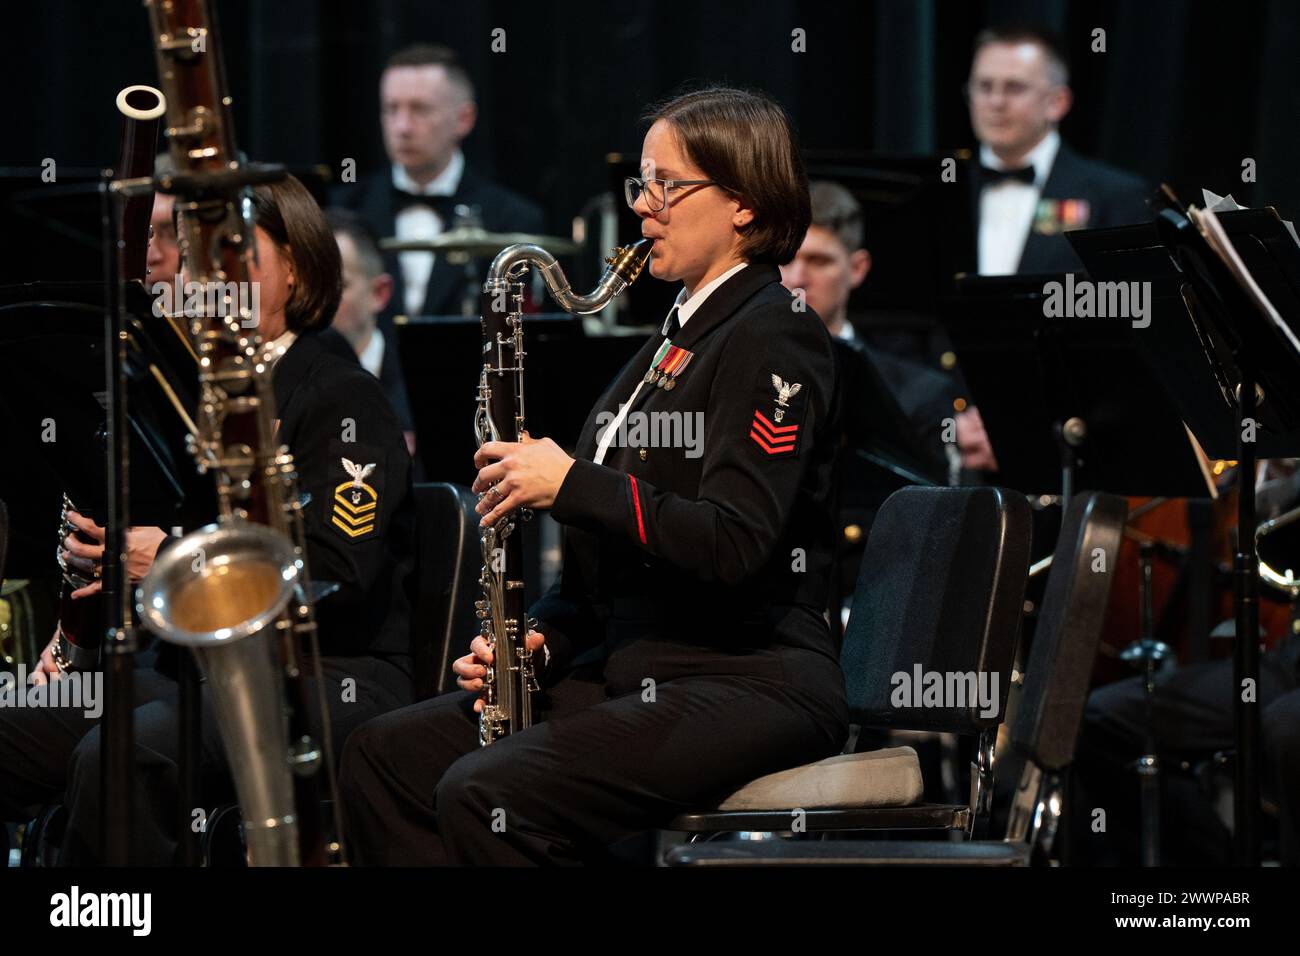 240213-N-PN185-2008 – Huntsville, Alabama (Feb. 13, 2024)  - Musician 1st Class Sarah Demy, from Burke, Virginia, performs during the United States Navy Band 2024 national tour concert at Huntsville High School.  The Navy Band will travel 2500 ground miles over 18 days to 7 states, giving 12 public concerts as well as 5 concerts for students in schools.  Navy Stock Photo